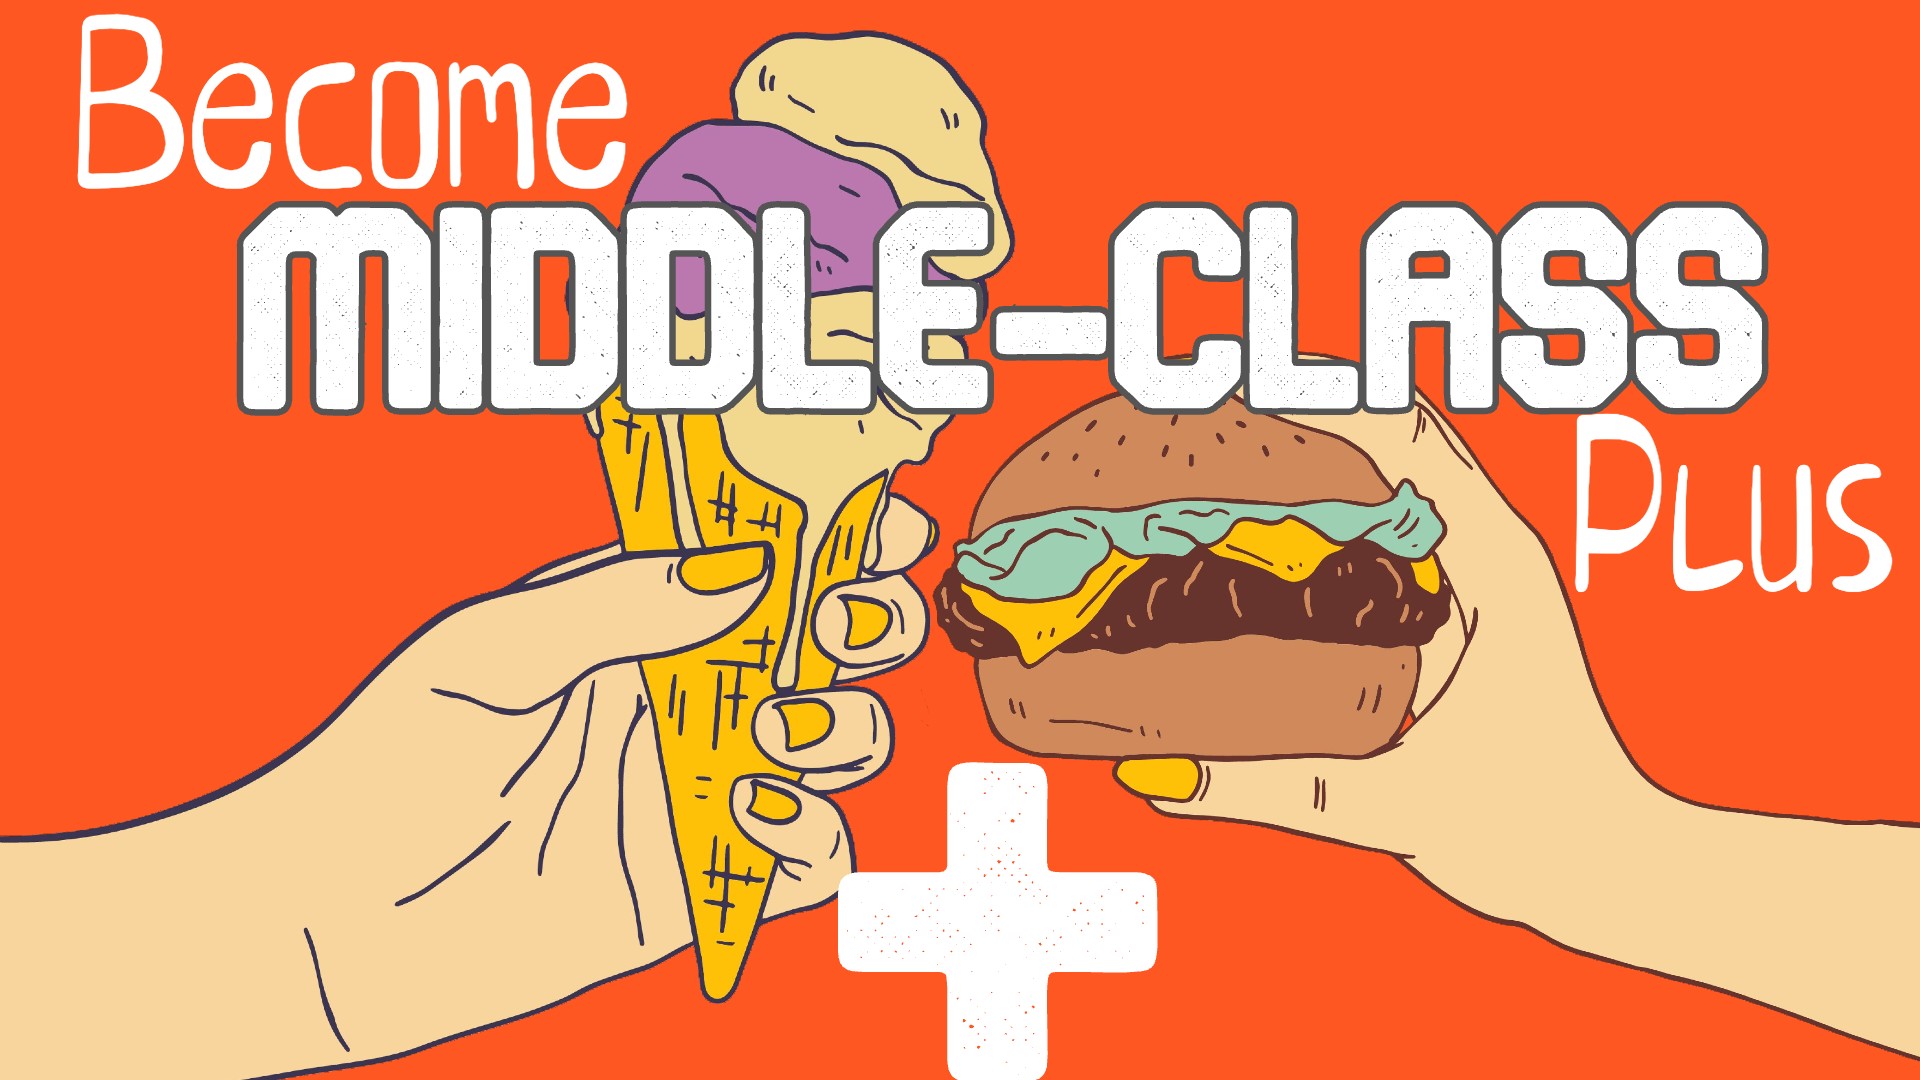 Become Middle-Class PLUS: Insert Growth Multipliers into Your Life